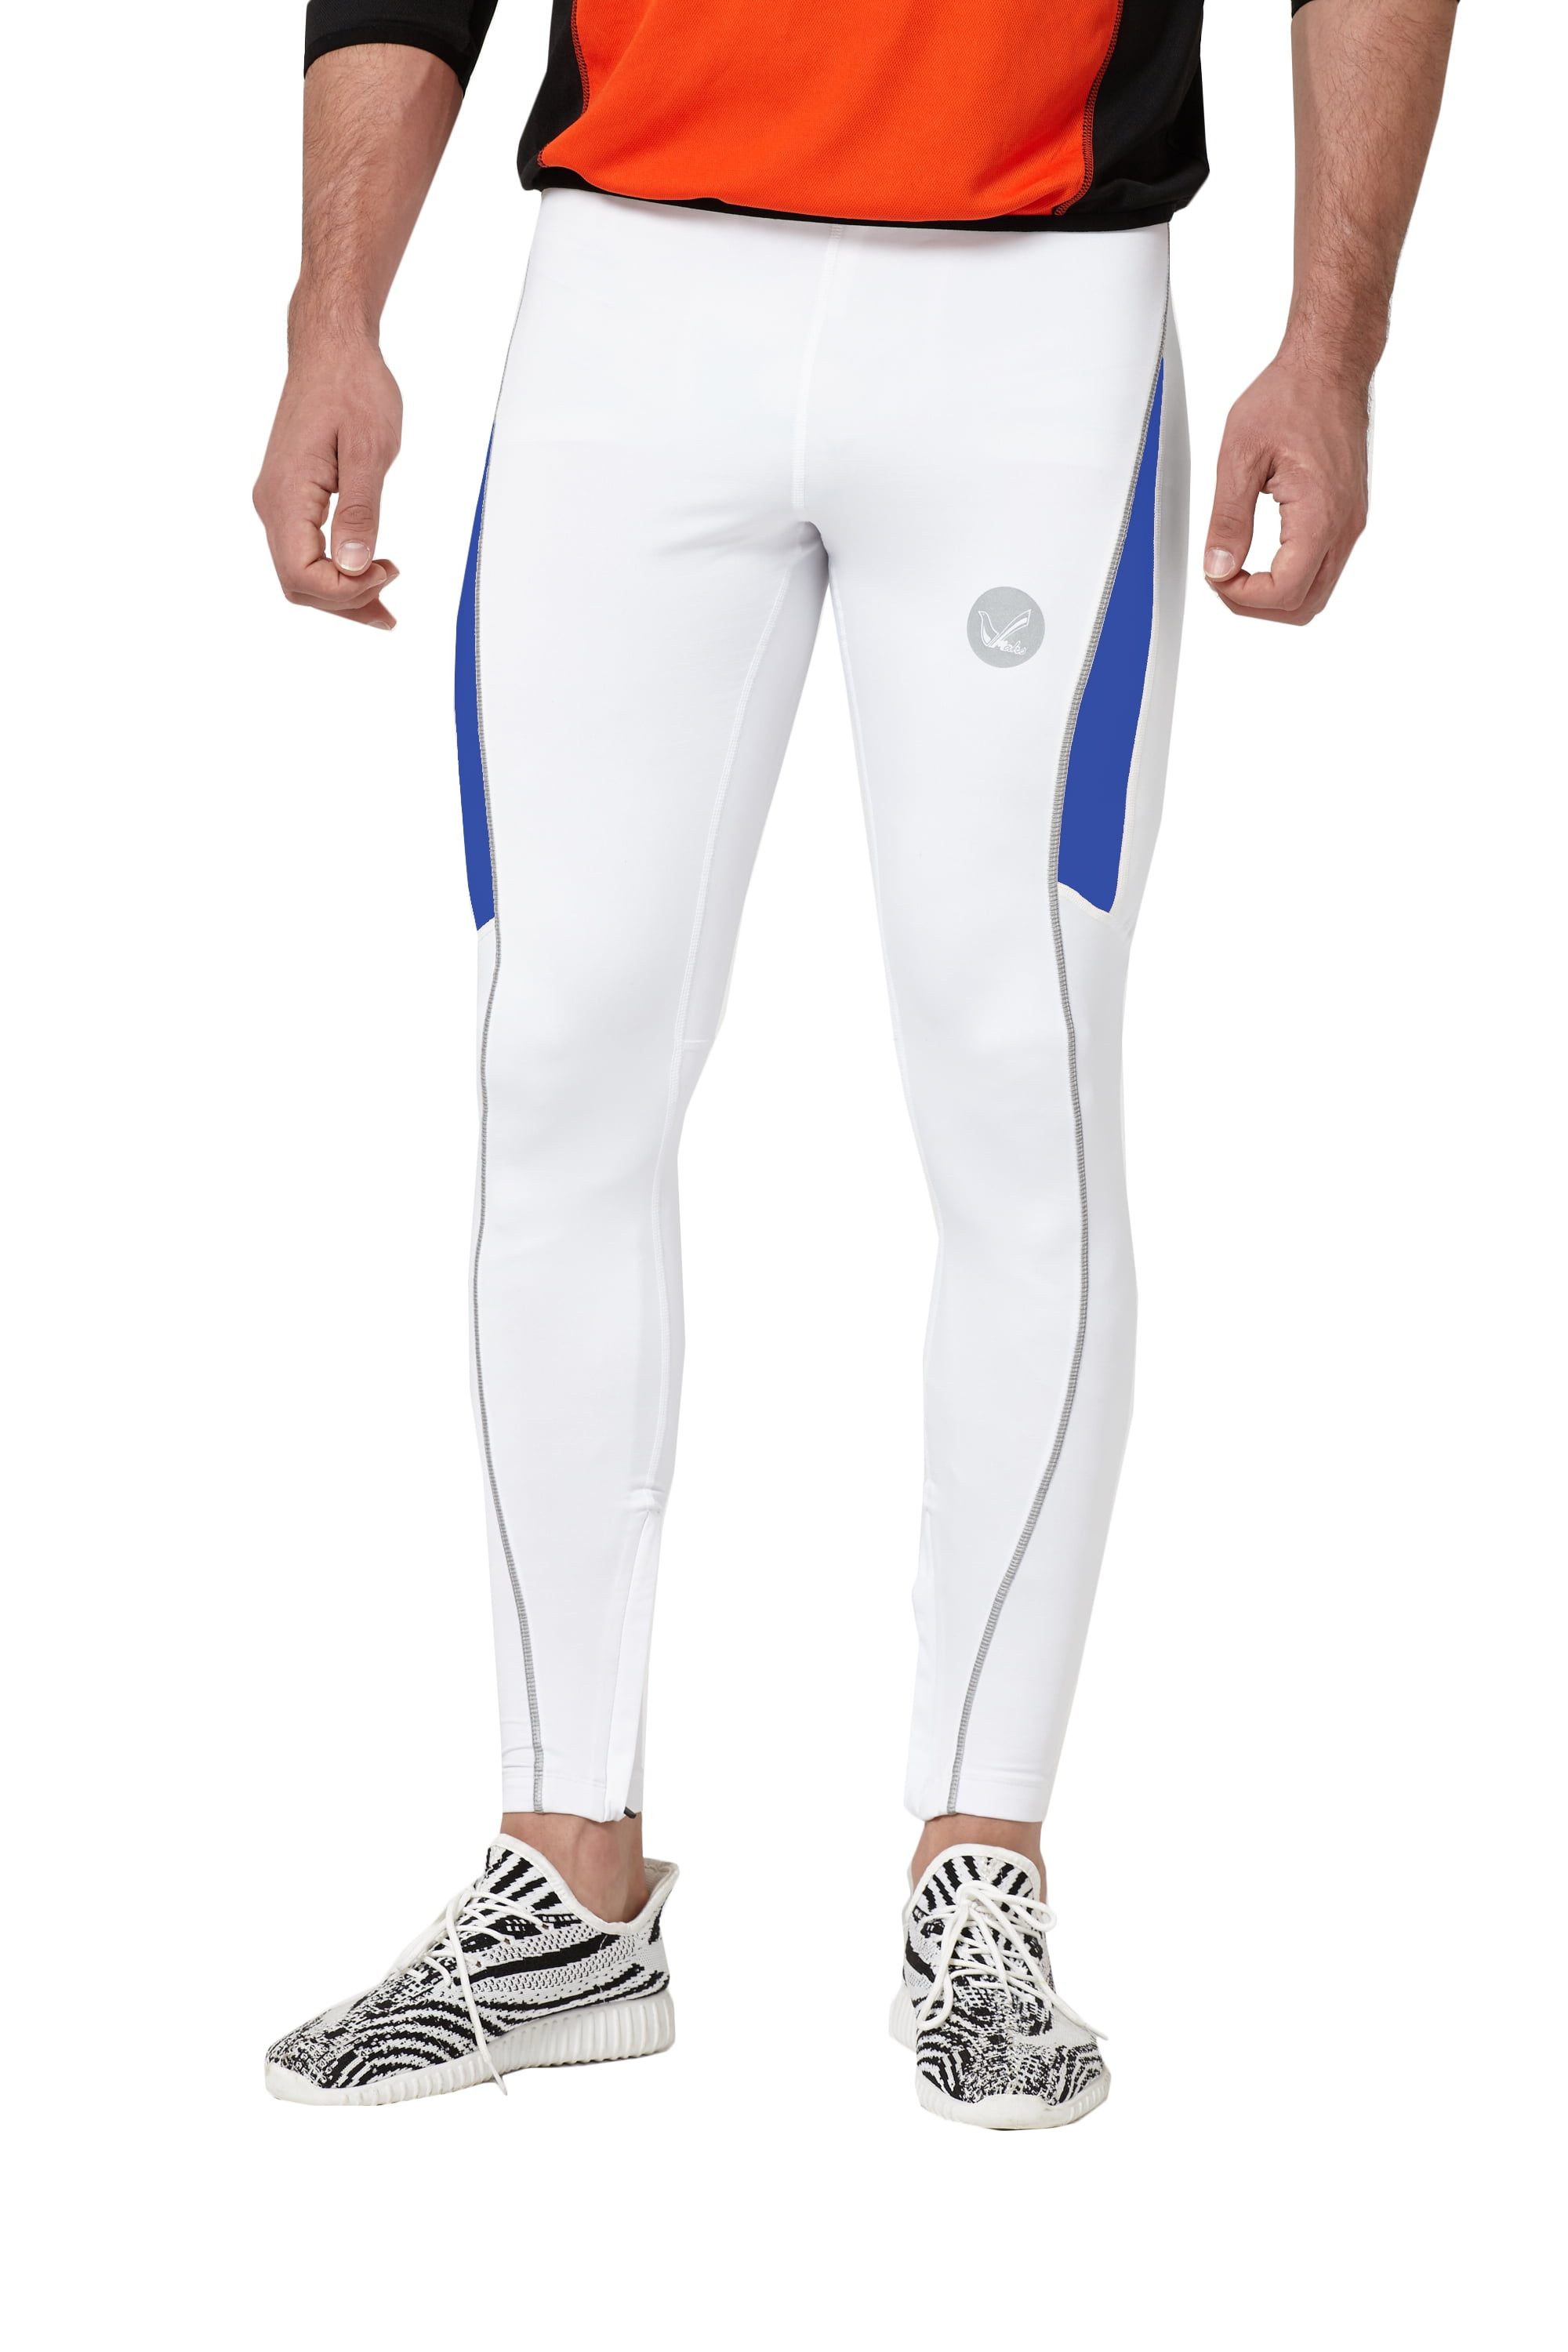 Men's Drawstring Elastic Waist Thermal Running Tights Pants Ankle Zipper  Reflective Elements 